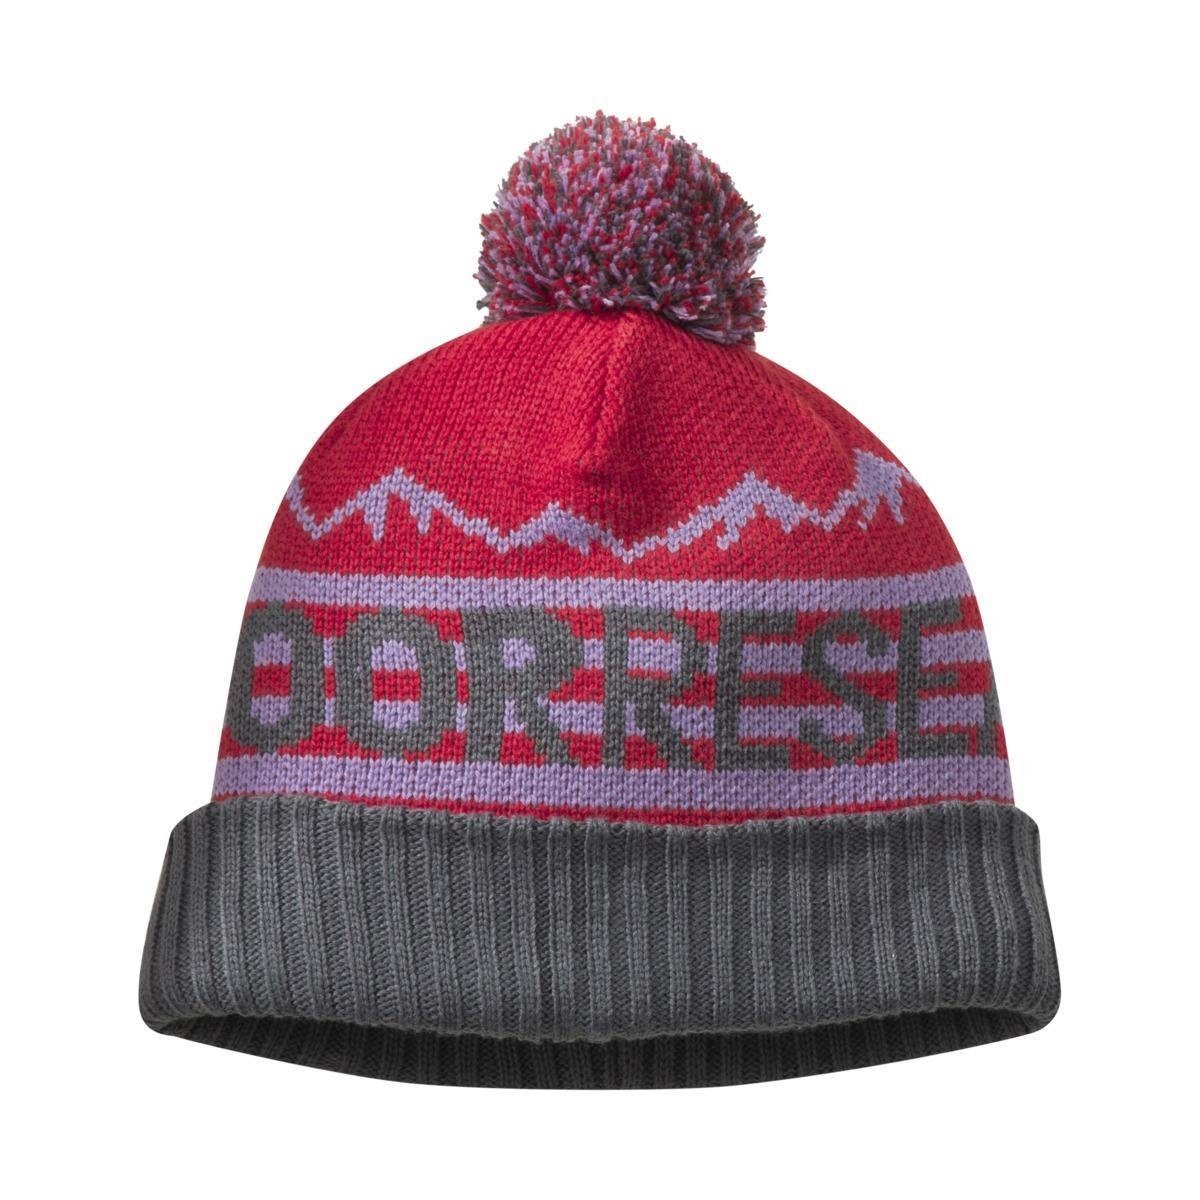 Beanie Mainstay Outdoor Research Kids' Research Mütze Beanie Outdoor